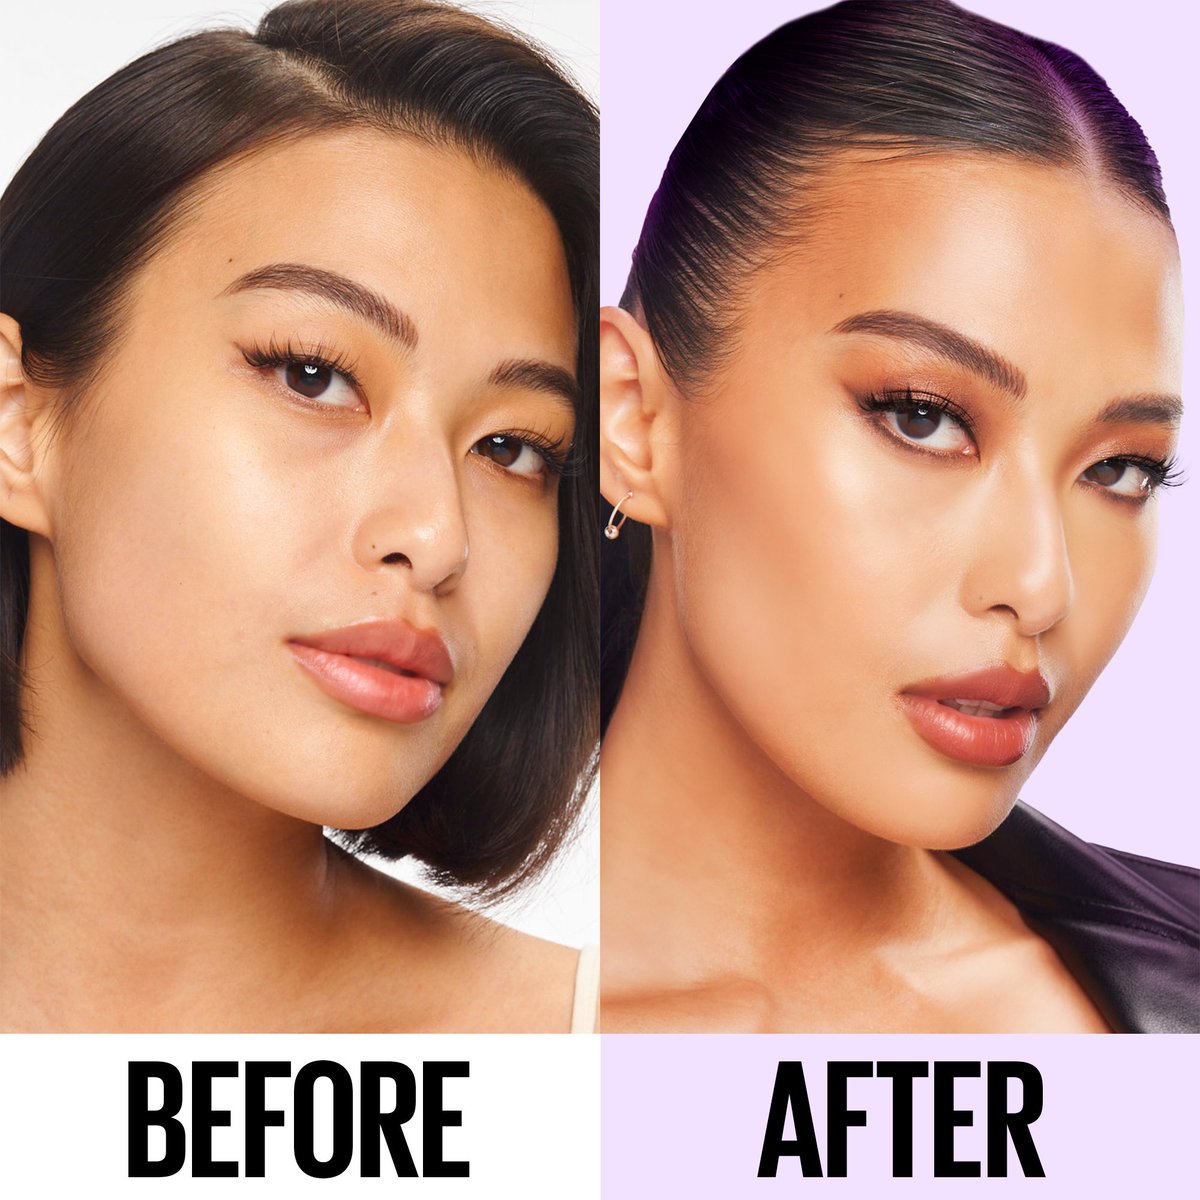 From subtle to stellar! Witness @michellemdee #LumiMatteGlow transformation with #SuperStayLumiMatte Foundation. Look at #MissLumiverse 's #LumiMatteGlow💜 #EnterDeeLumiverse and experience that 30HR weightless long wear for only PHP 699 #MaybellinePH